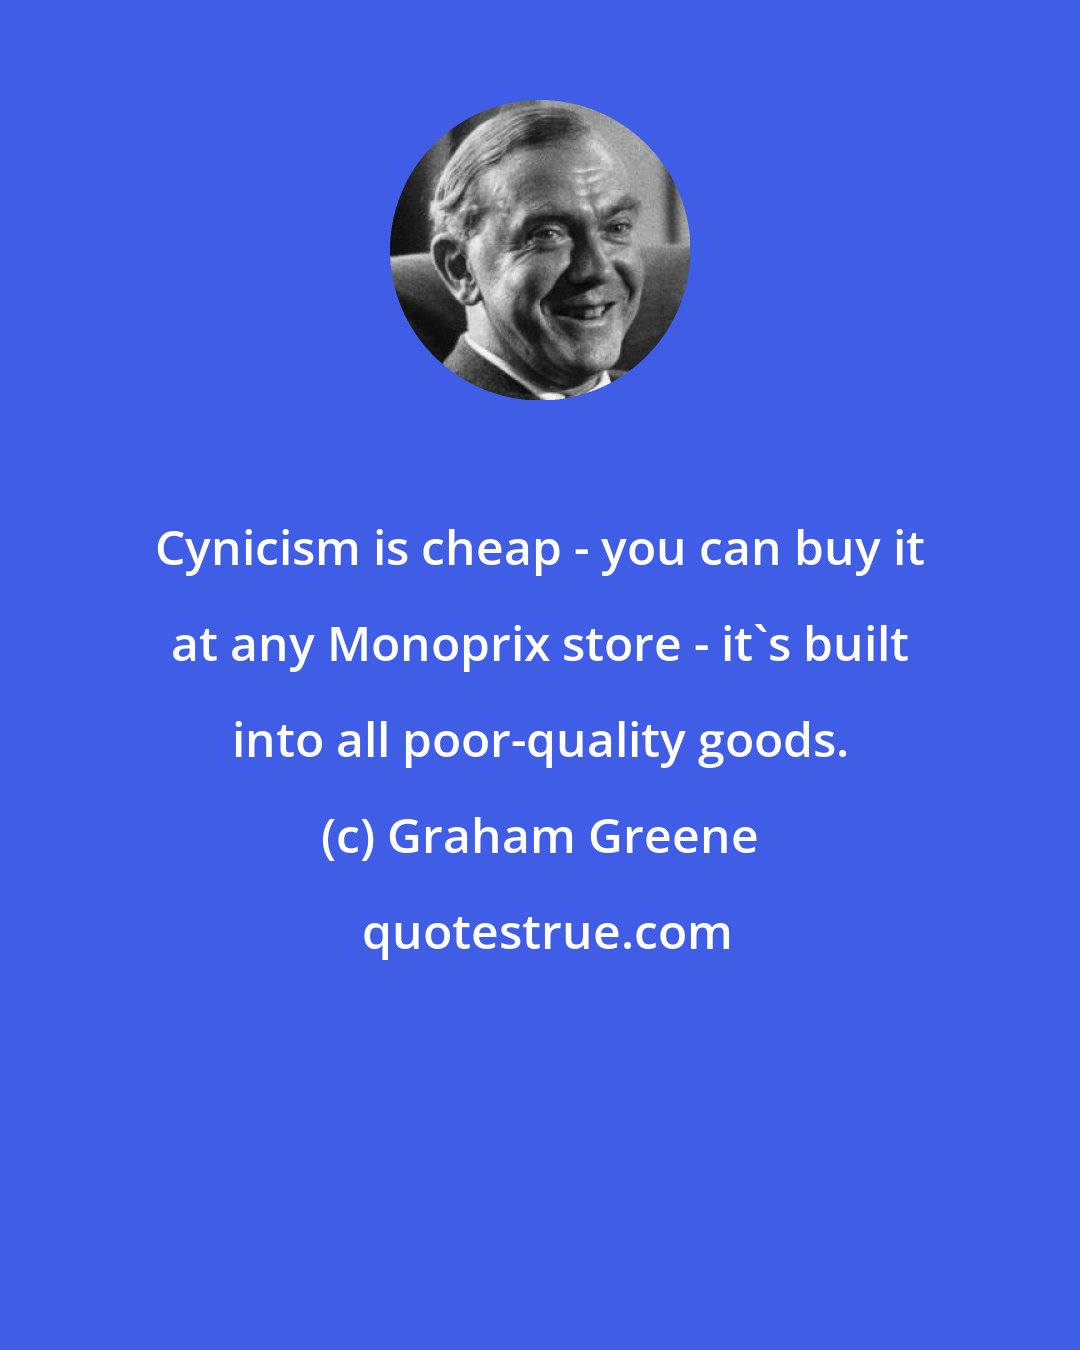 Graham Greene: Cynicism is cheap - you can buy it at any Monoprix store - it's built into all poor-quality goods.